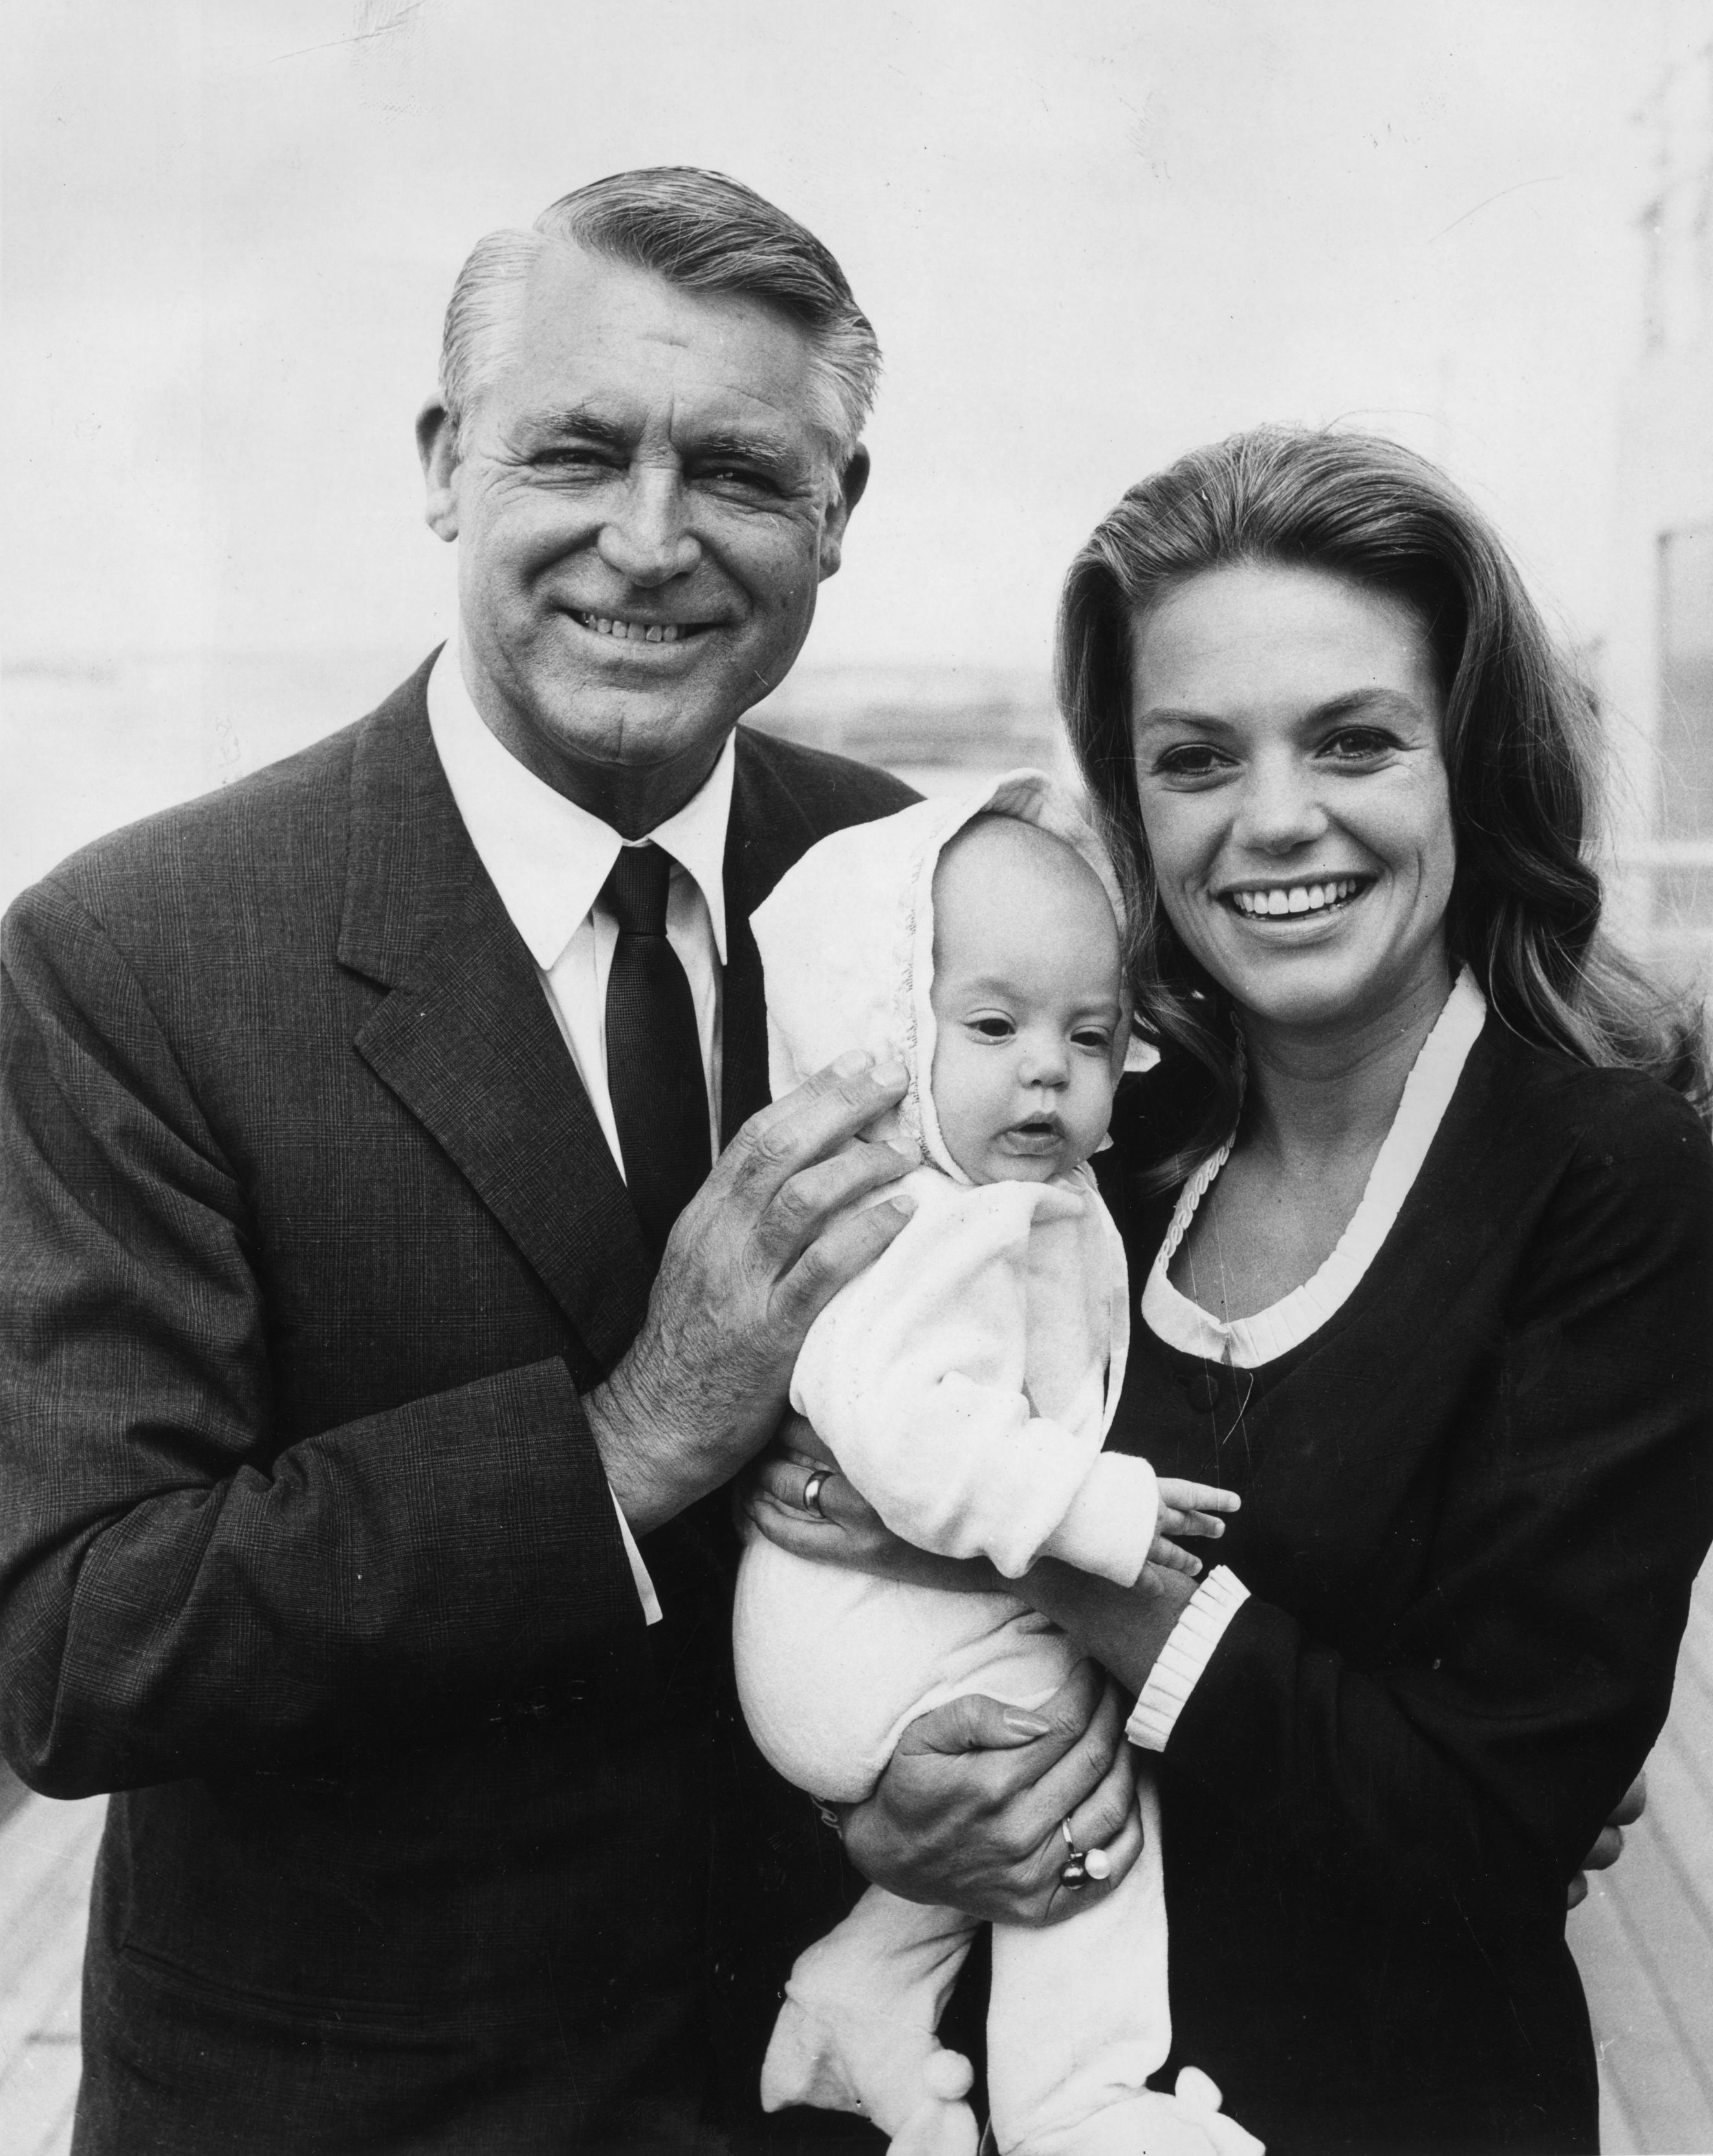 Film star Cary Grant with his fourth wife Dyan Cannon and their baby daughter Jennifer on July 15, 1966 on a visit to England | Photo: Getty Images